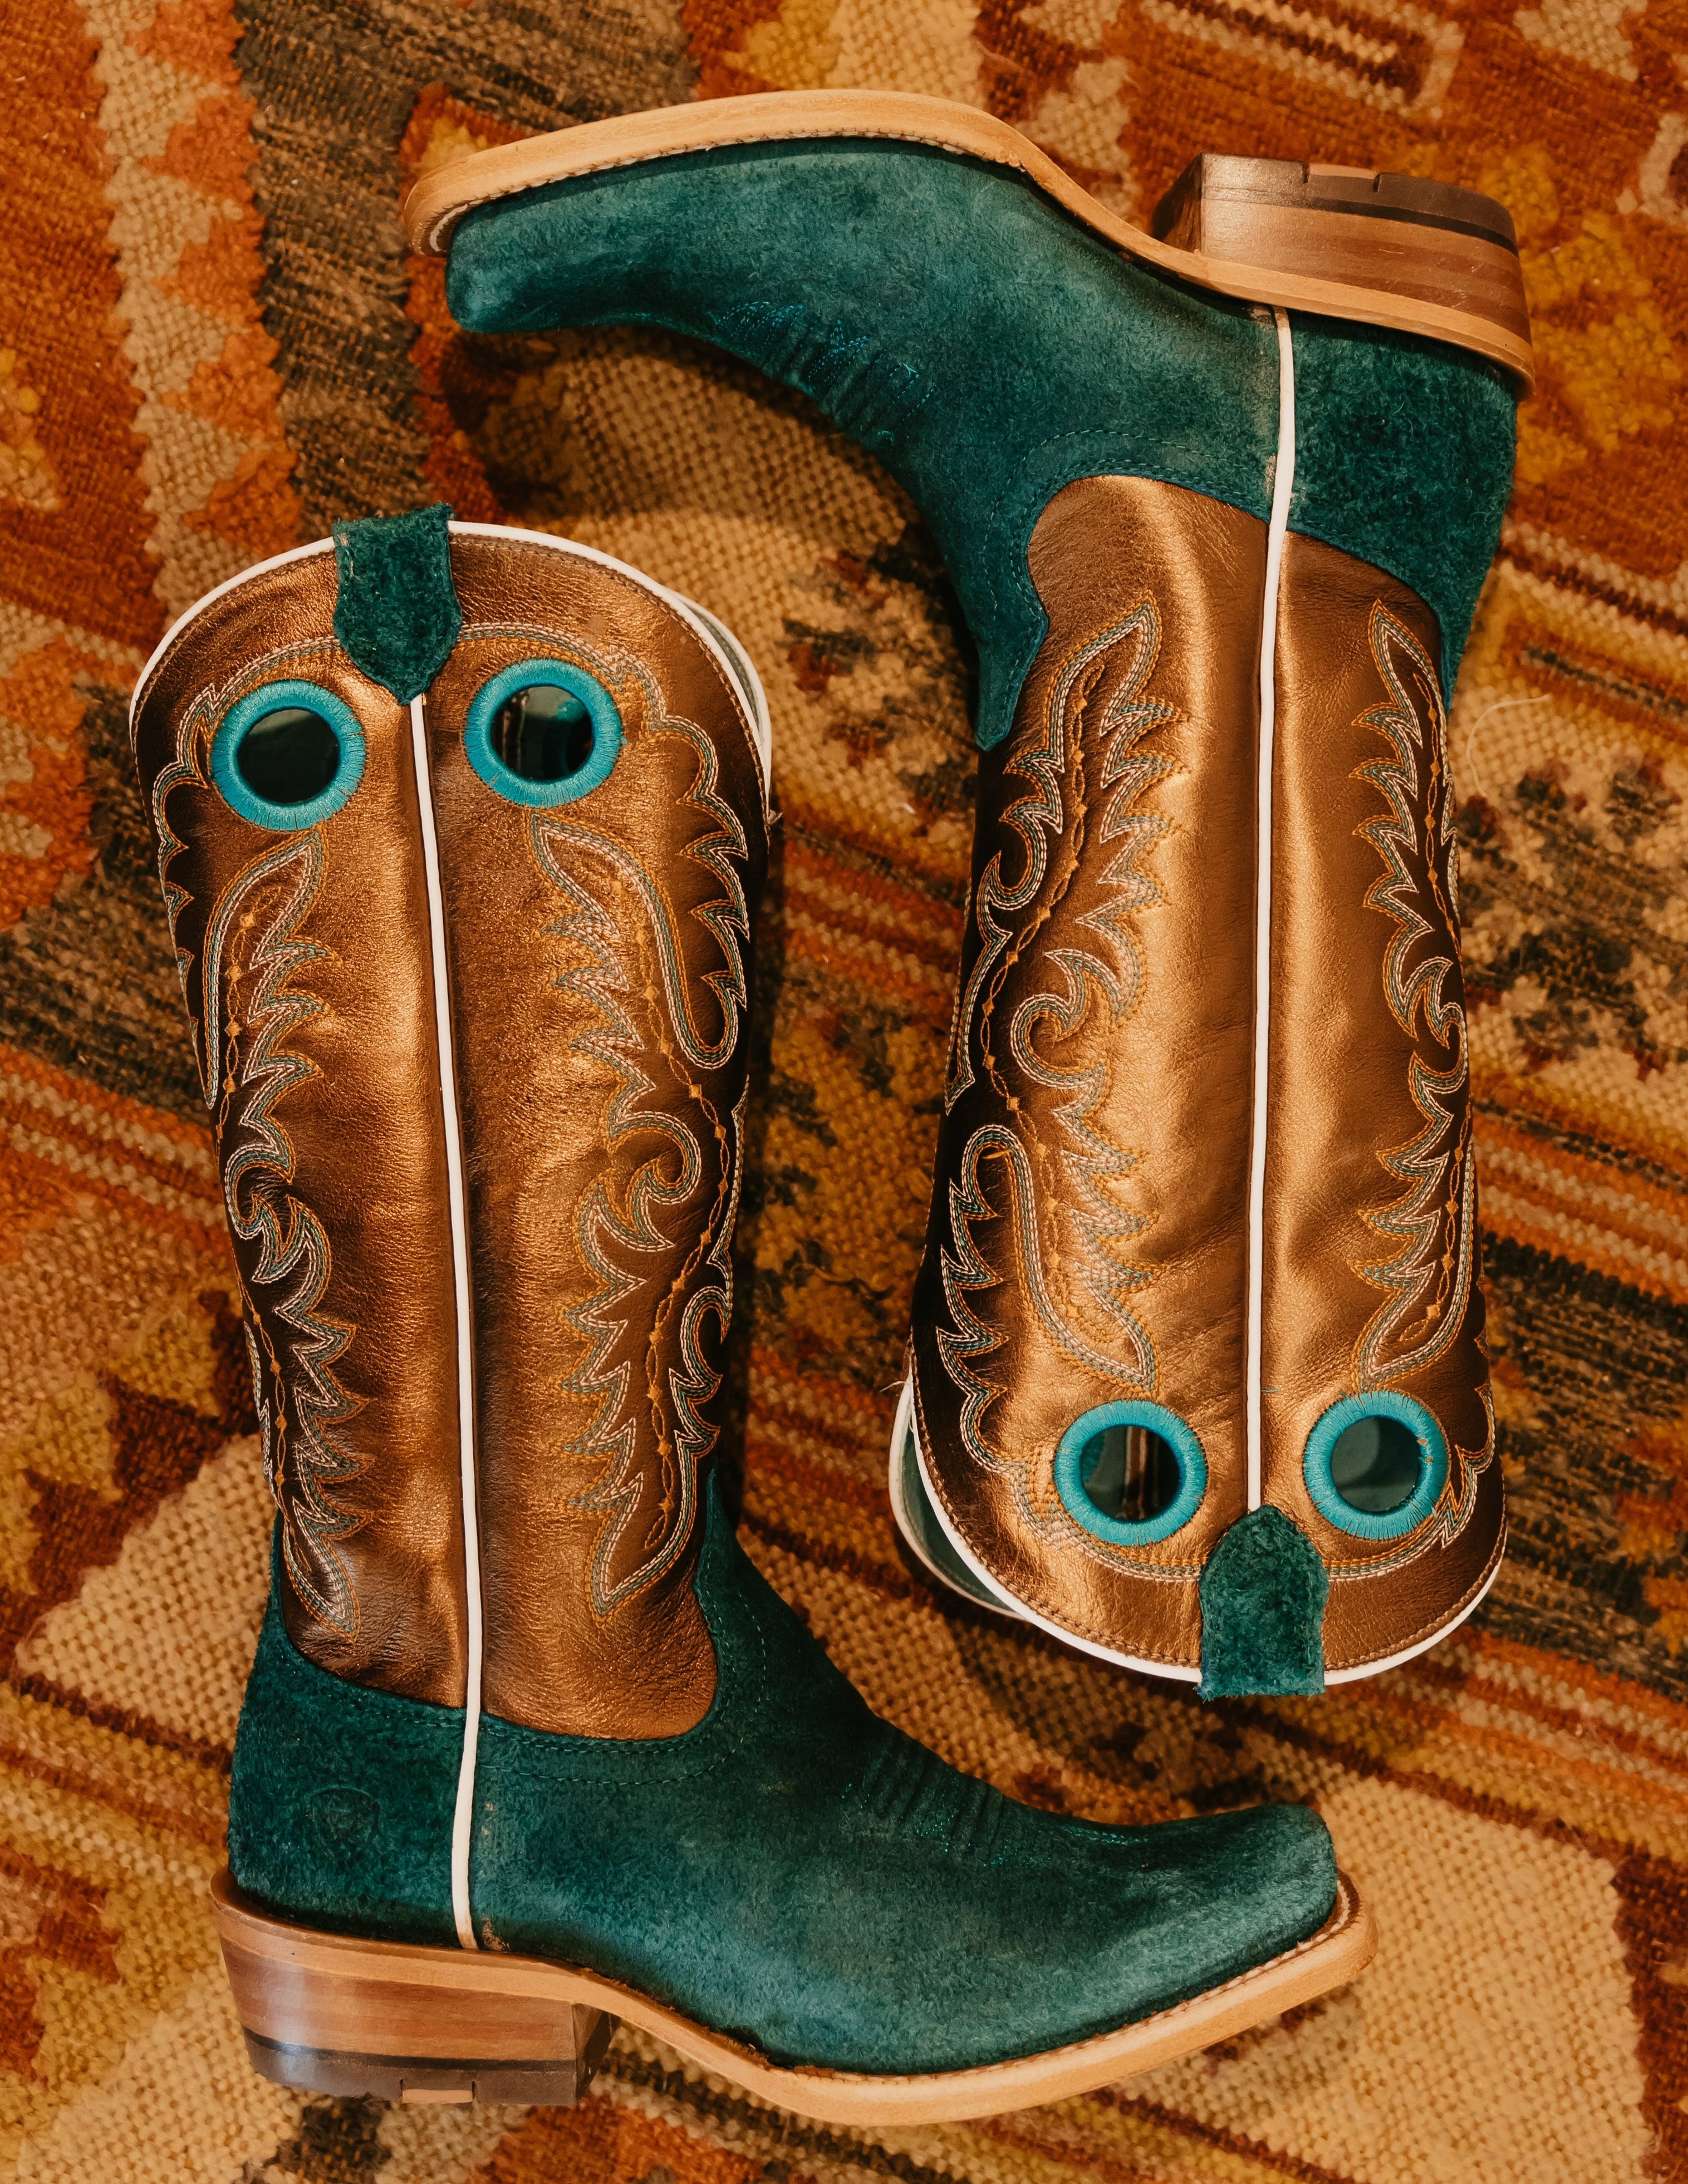 The Turquoise Ariat Futurity Boot